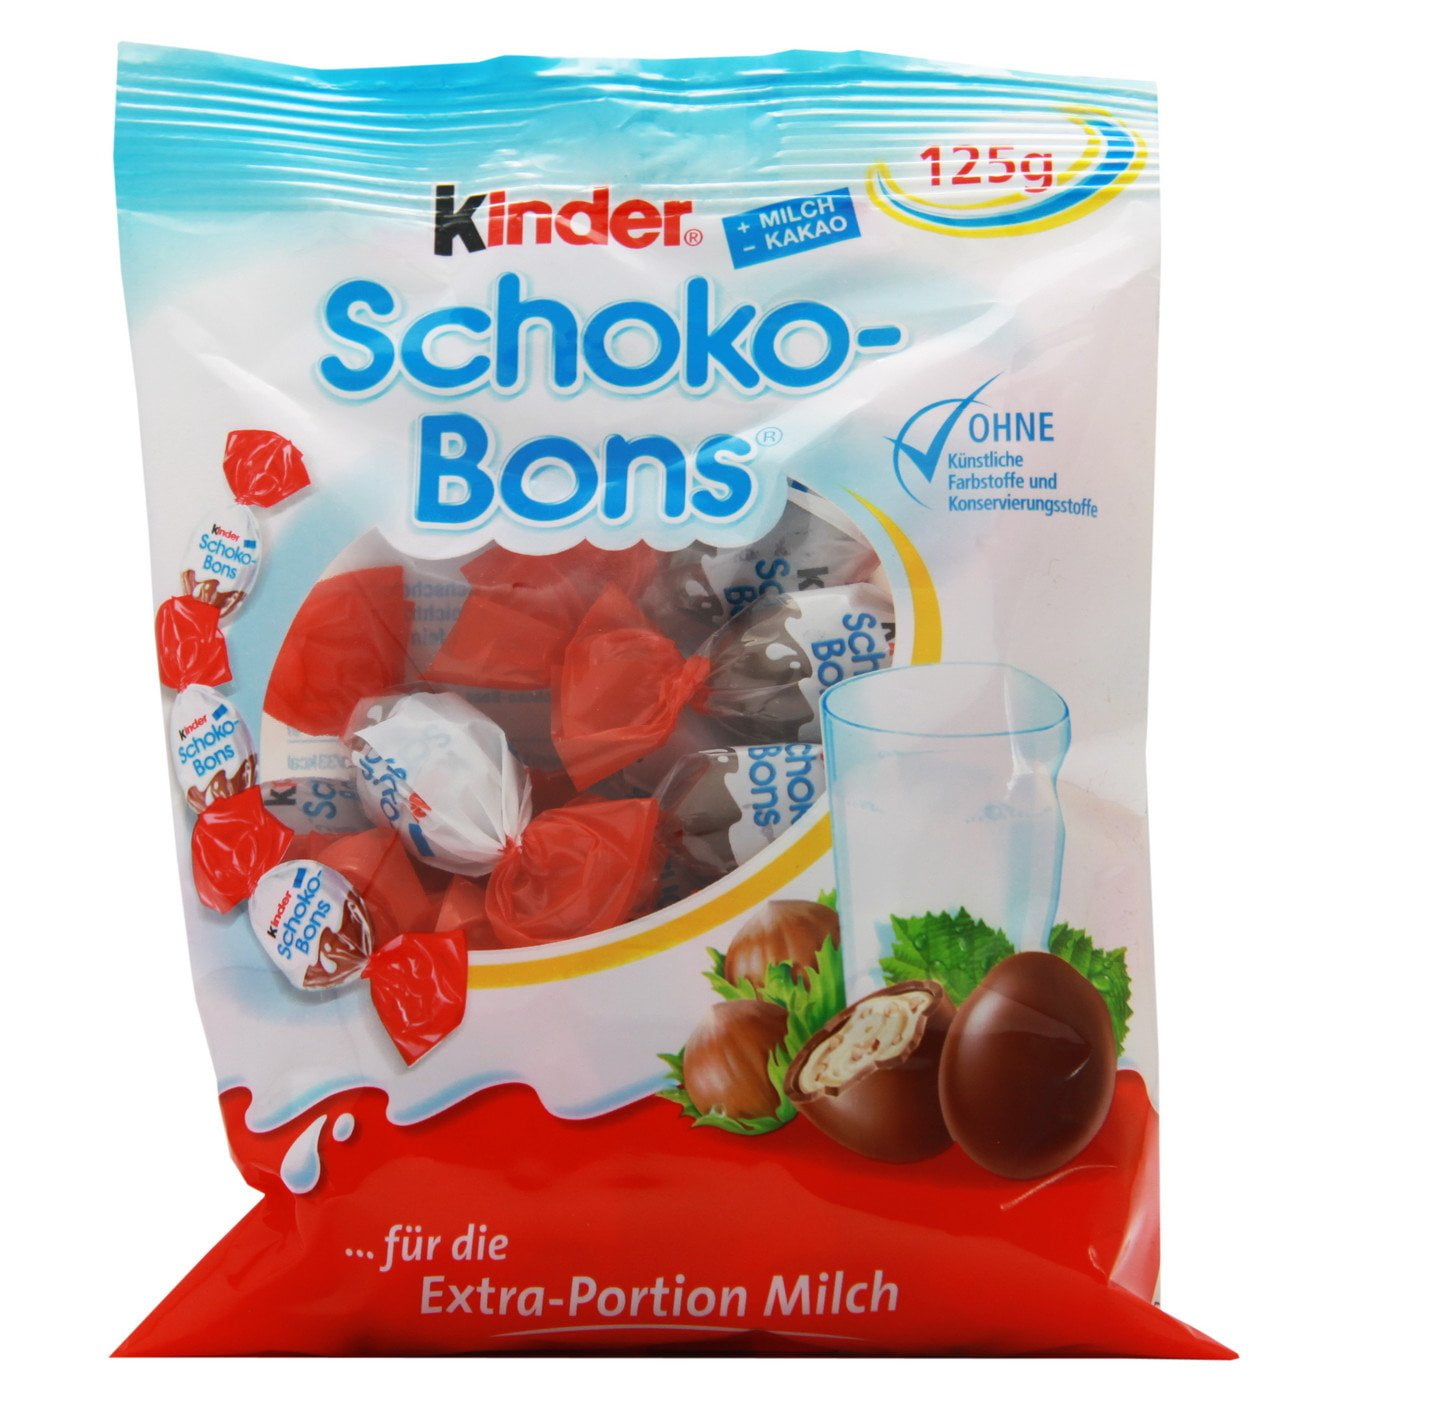 Schoko-bons Chocolate Package Made by Kinder Editorial Photography